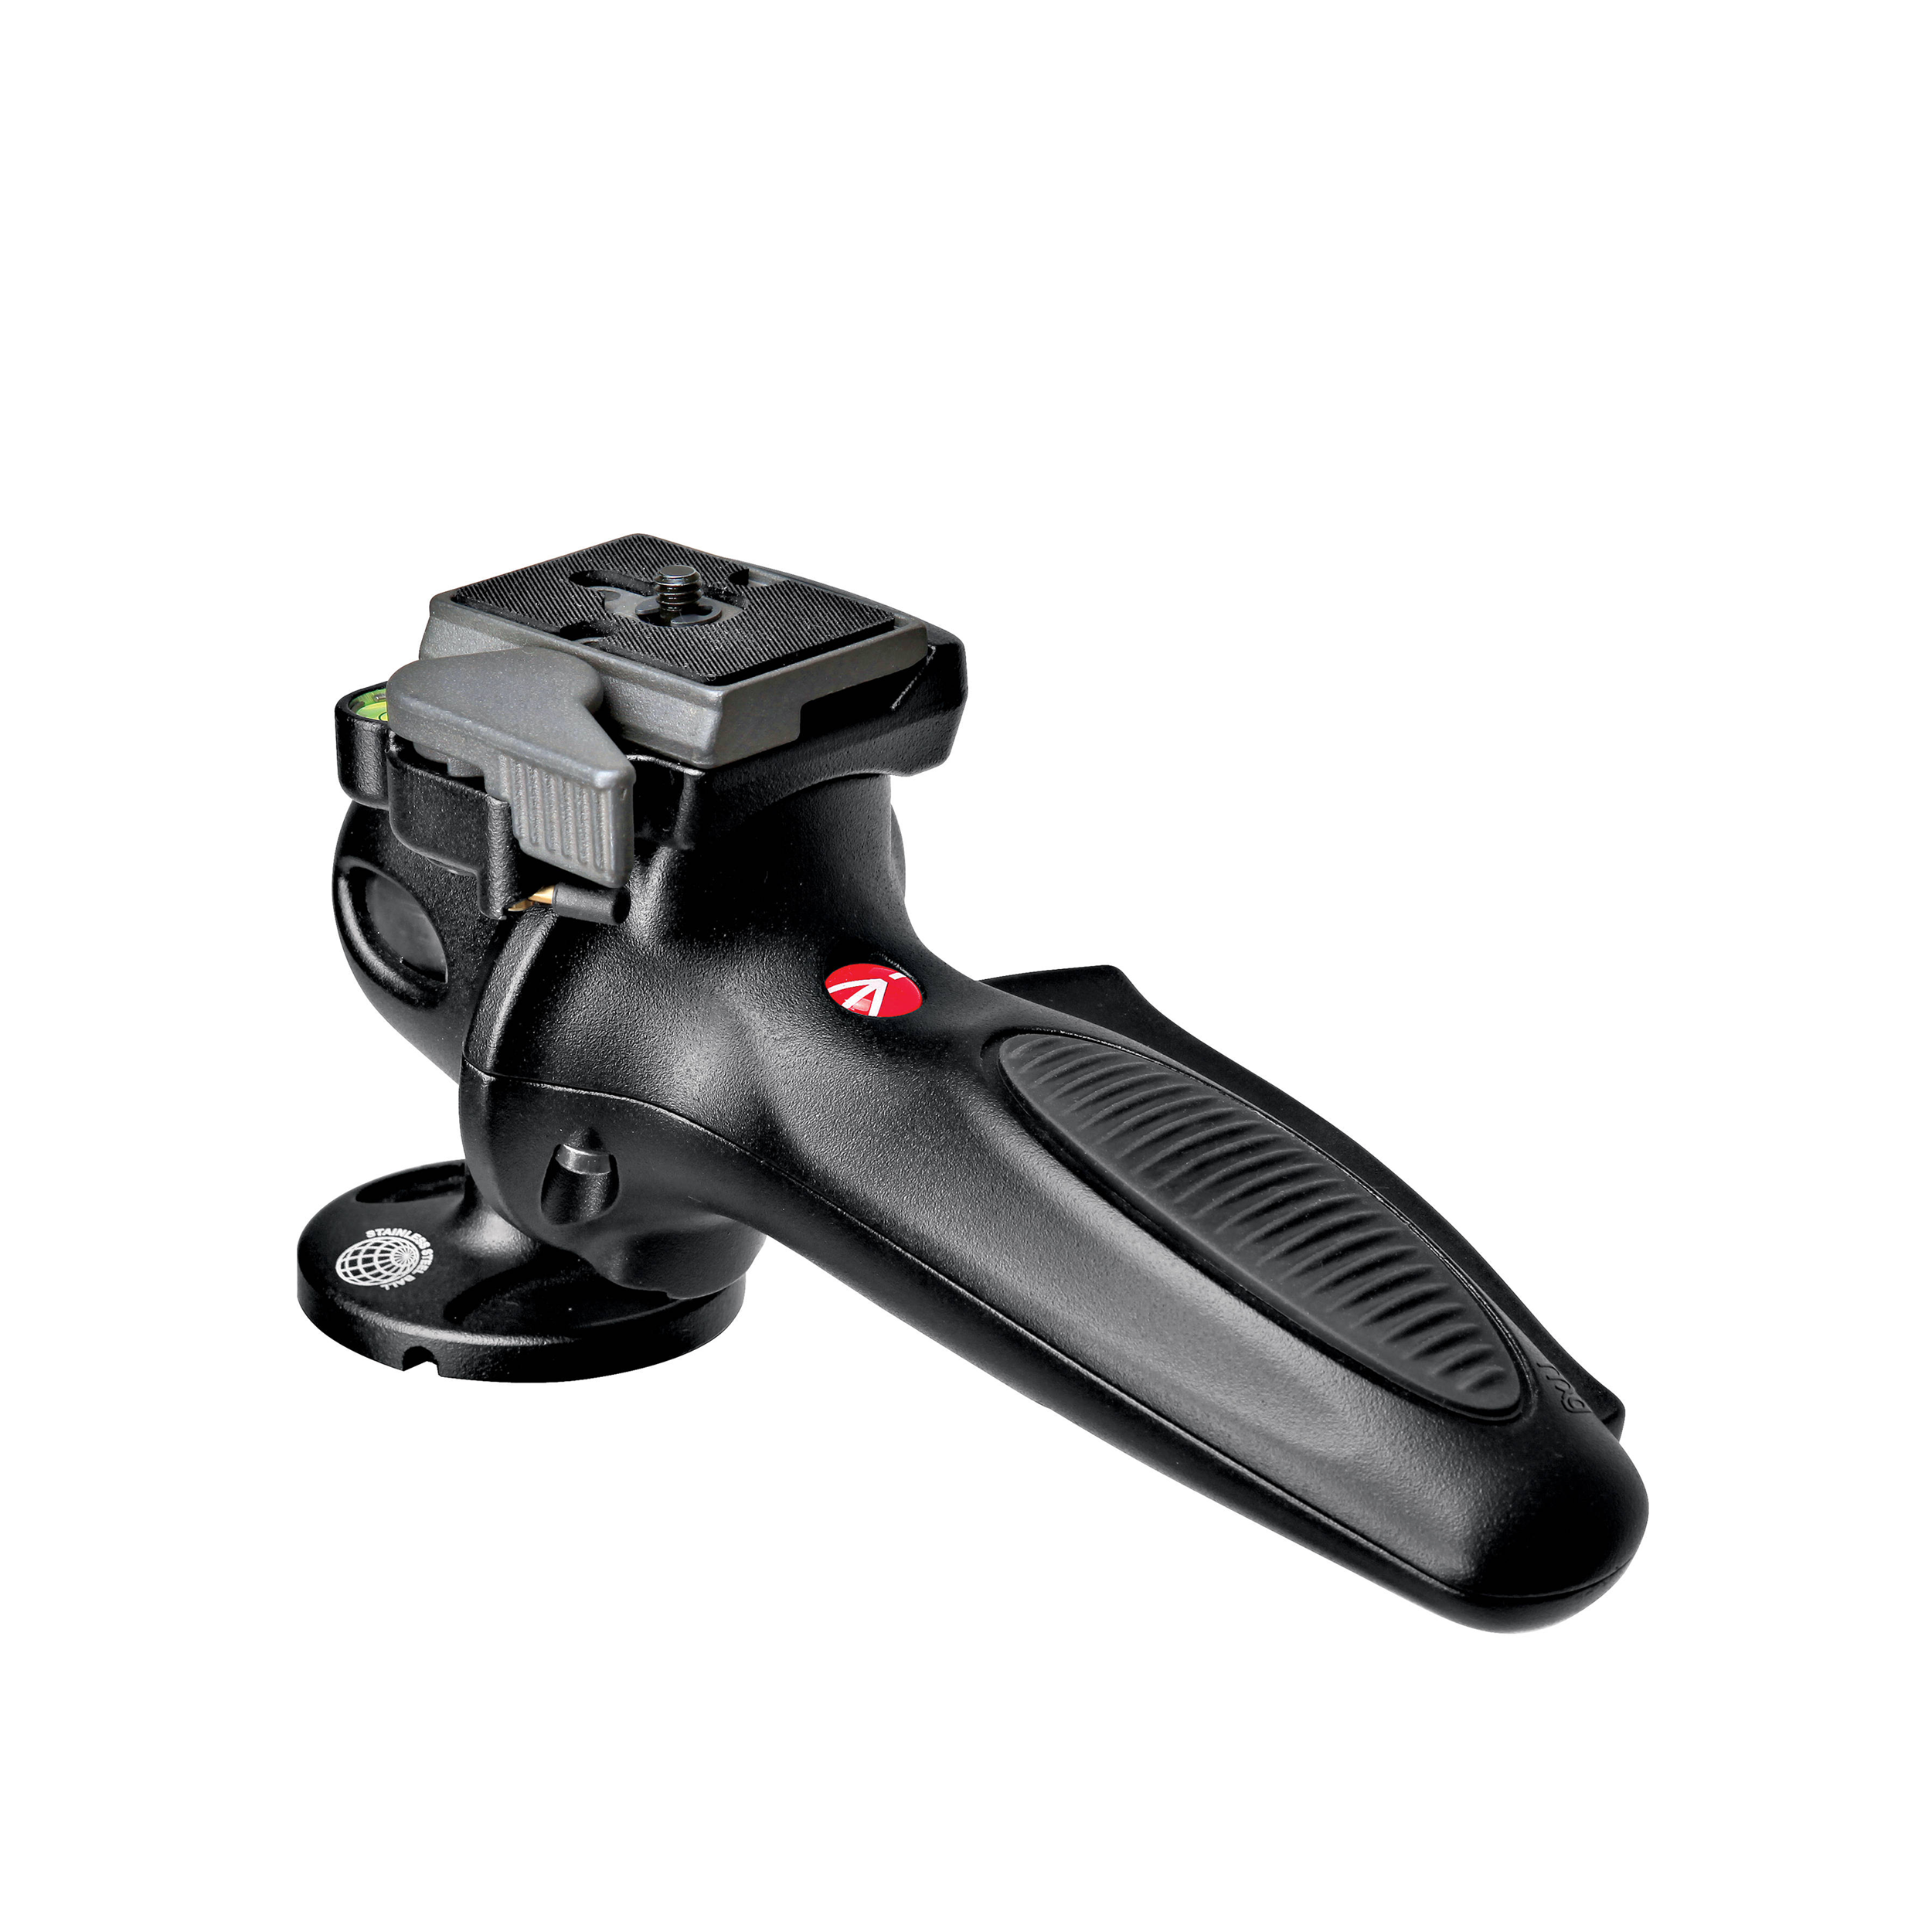 Manfrotto 327RC2 Ball Head with 200PL-14 Quick Release Plate